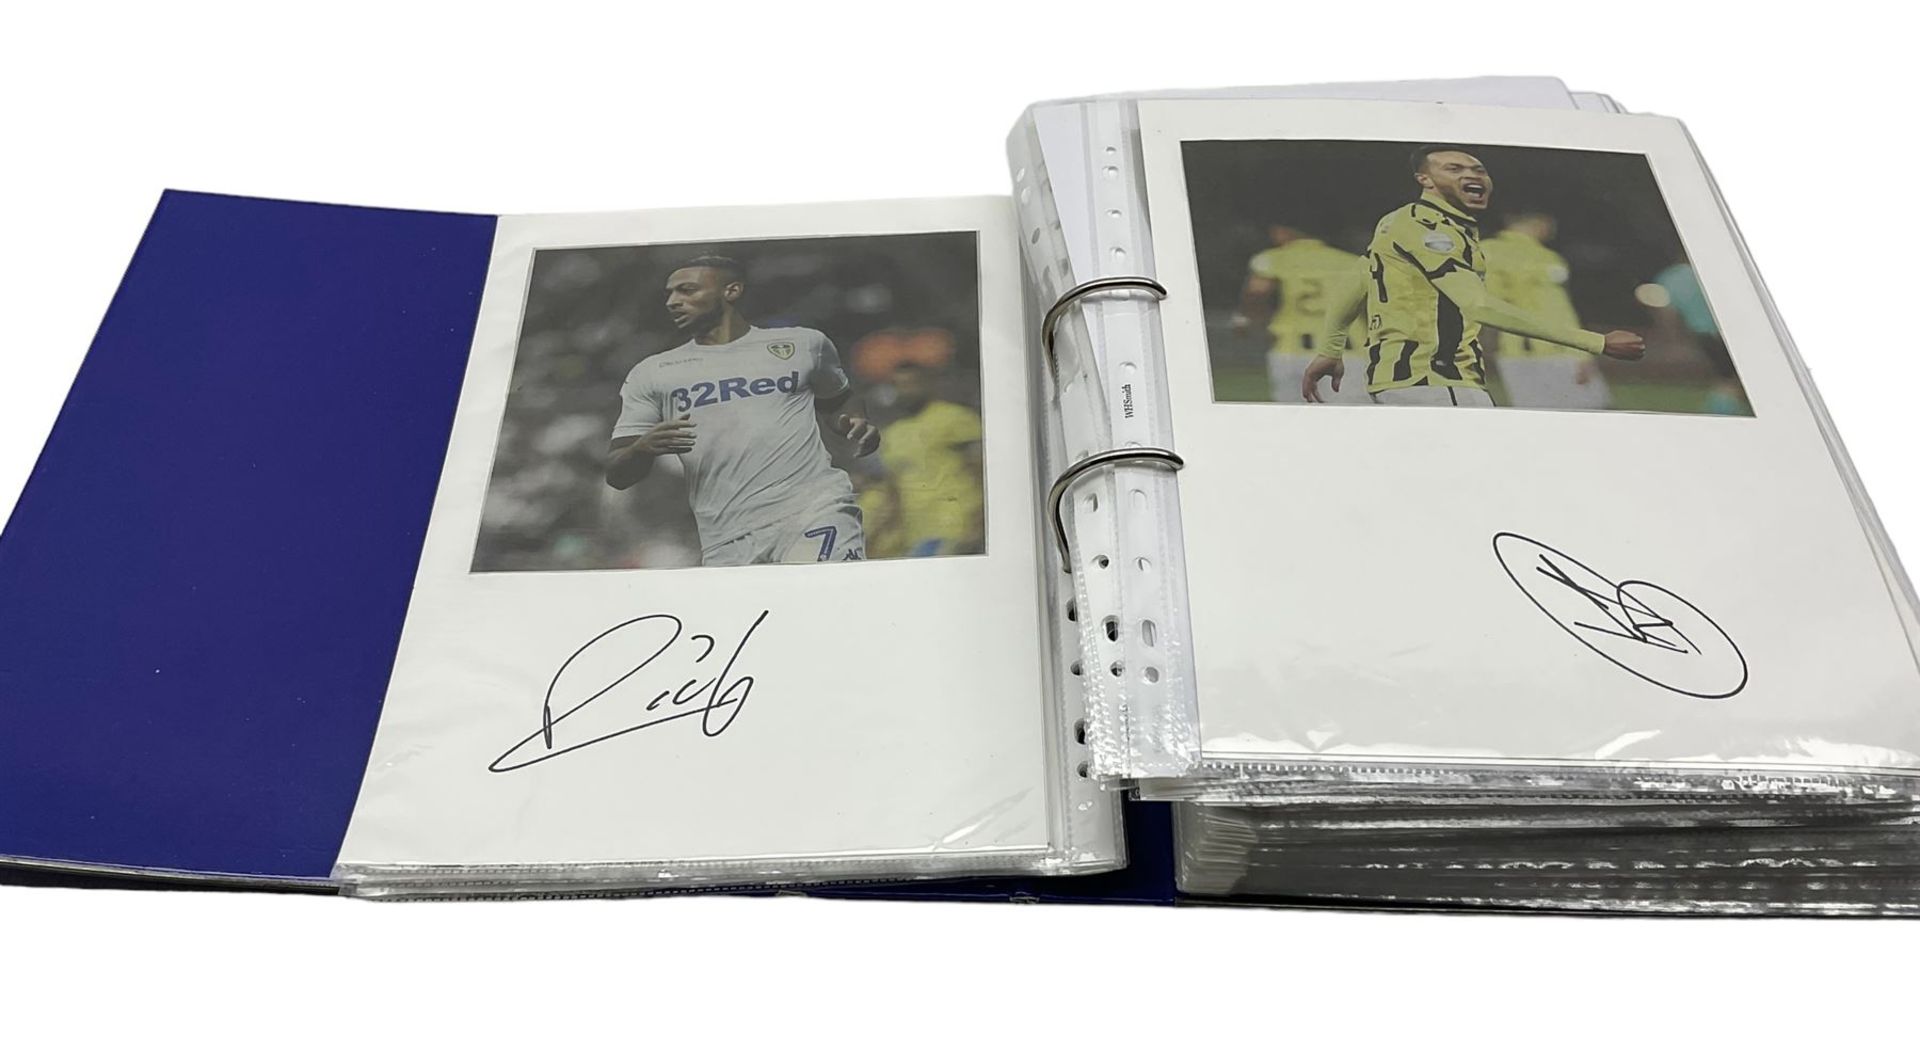 Leeds United football club - various autographs and signatures including Calvin Phillips